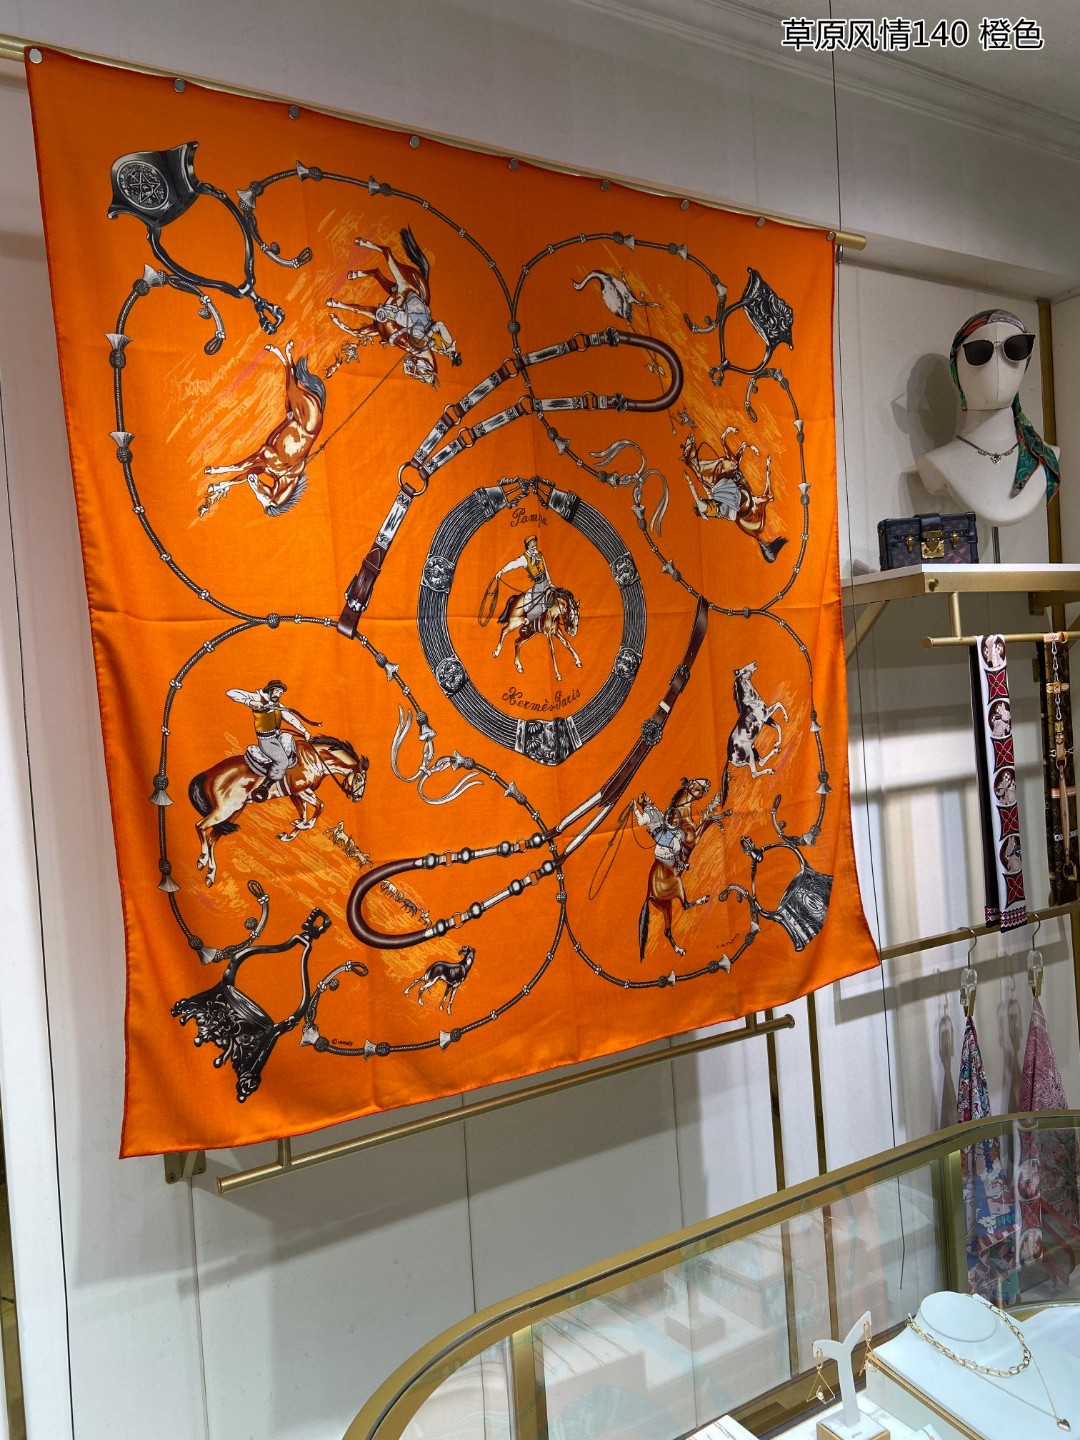 Hermes Cashmere Scarf For Women  # 273732, cheap Hermes Scarves, only $56!